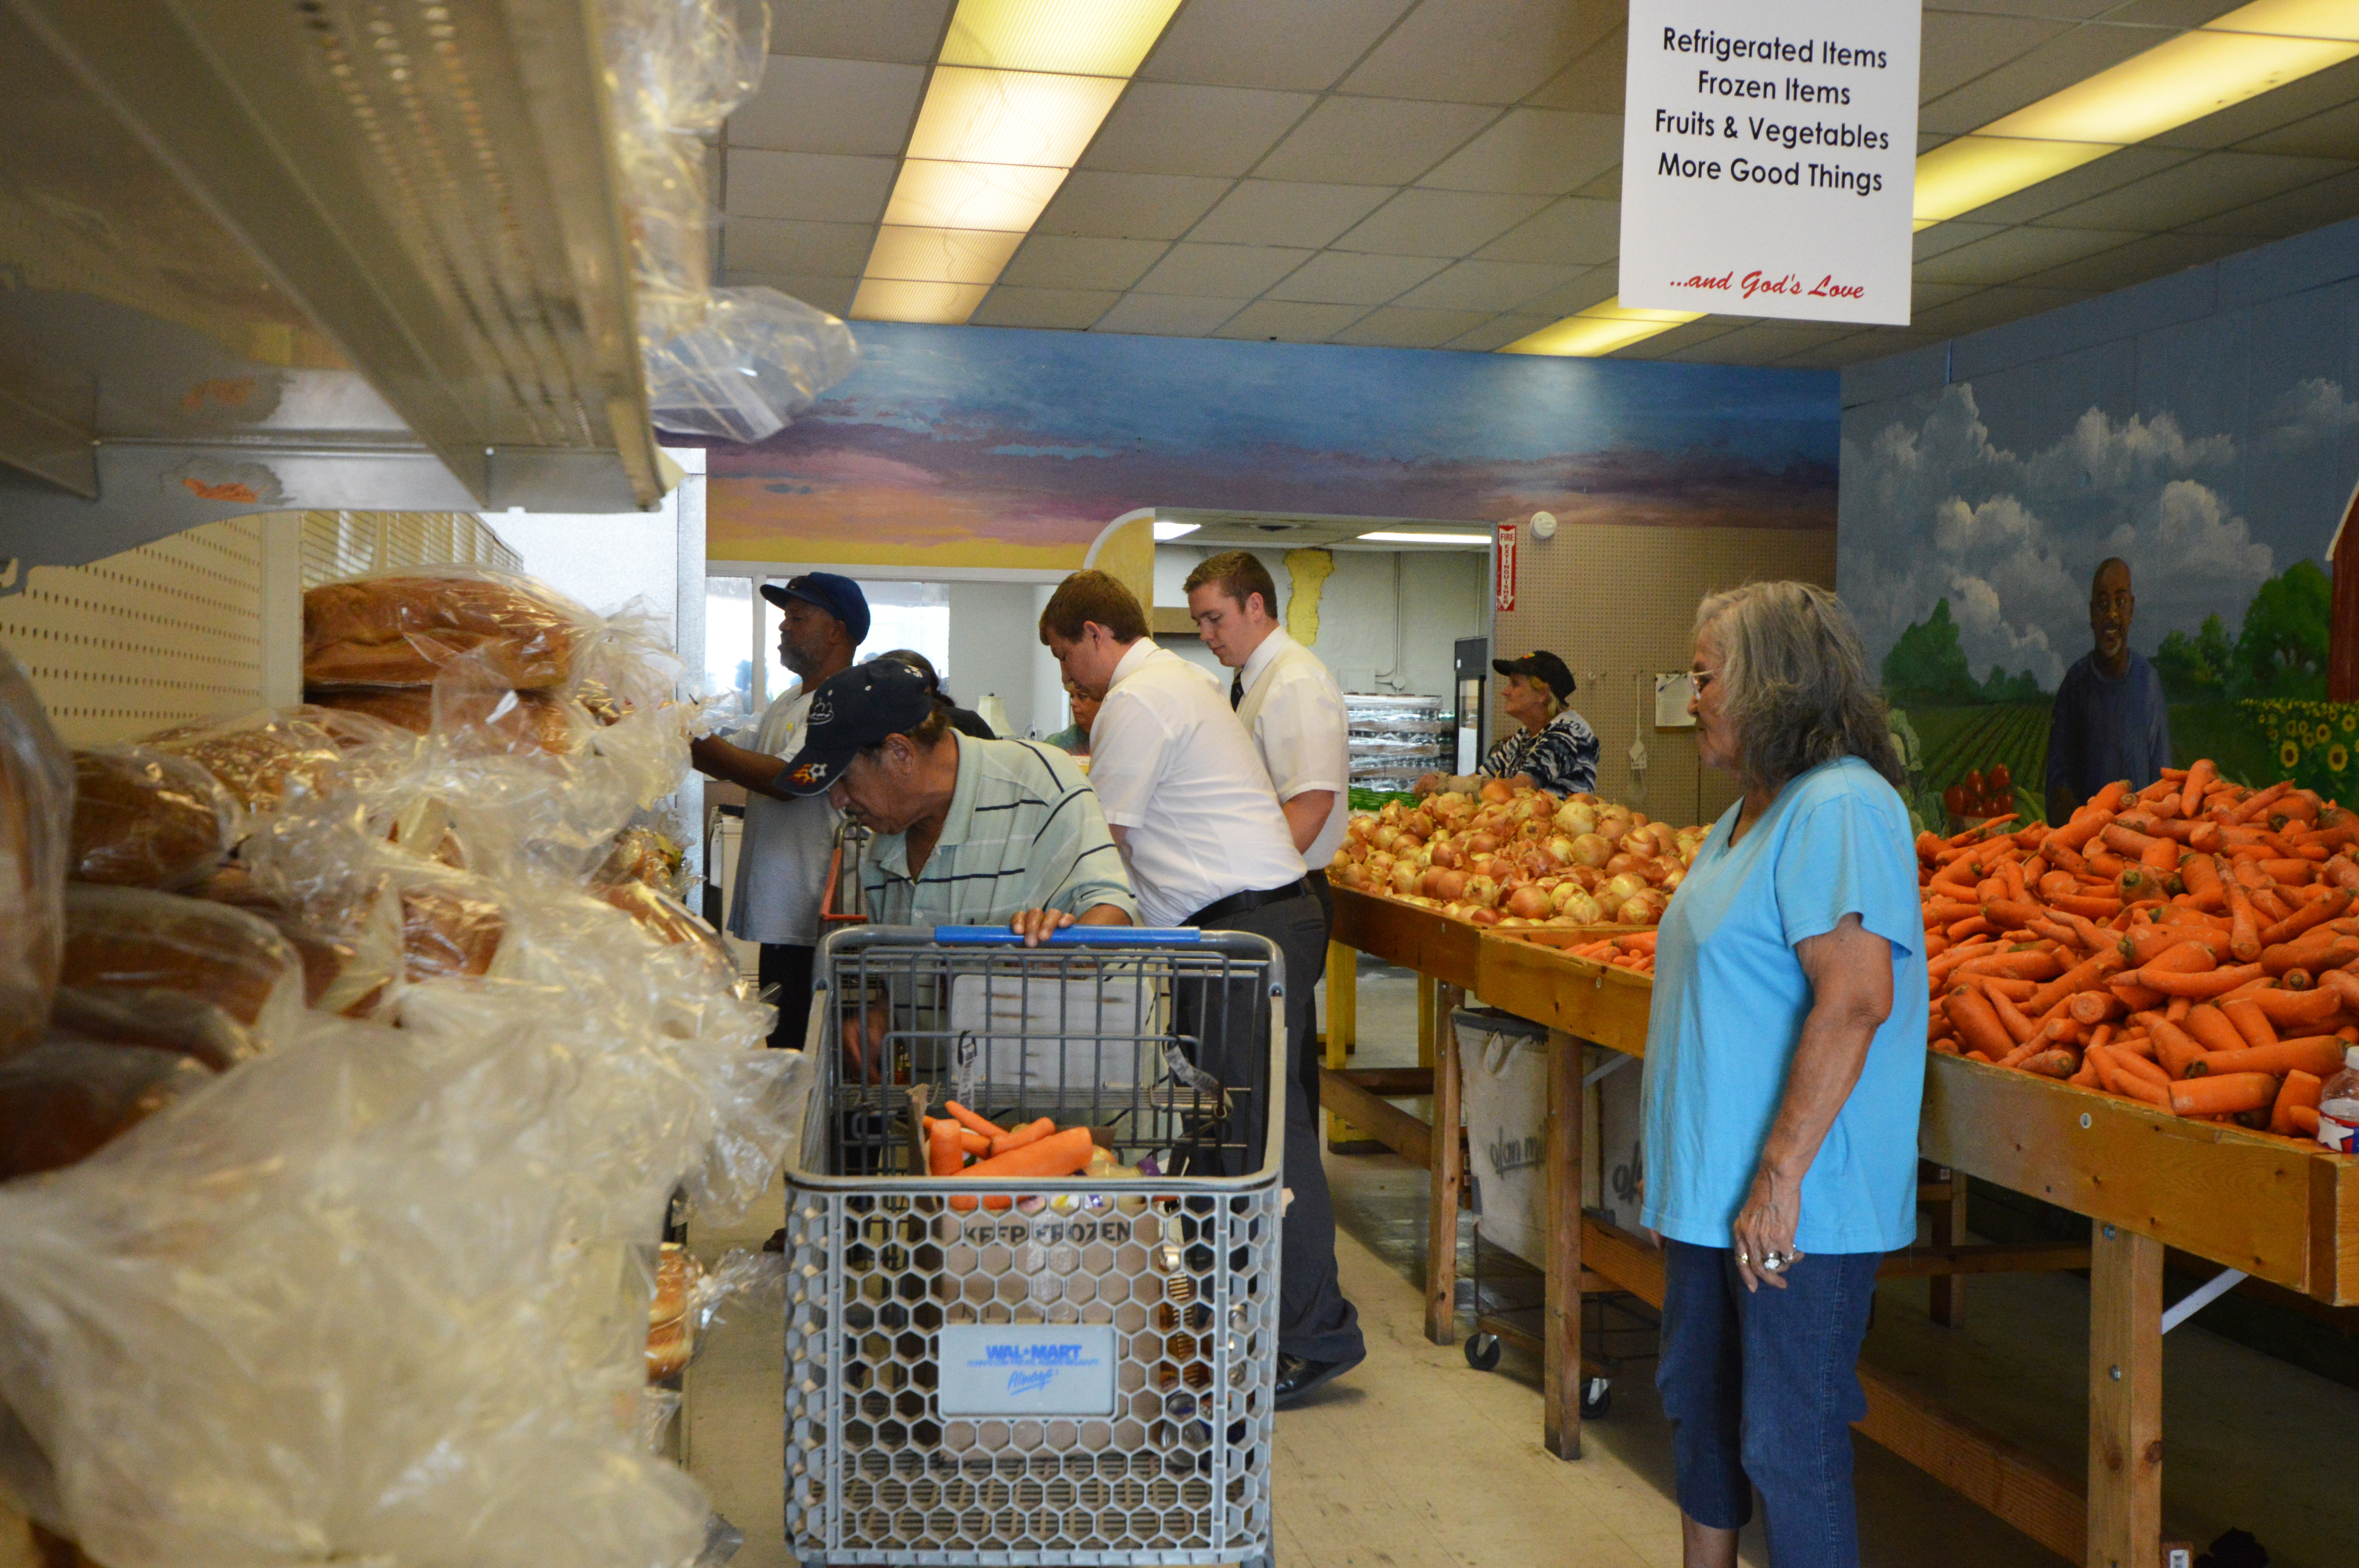 Each Thursday, The Shepherd's Heat food pantry opens its doors to distribute food to those in need in the Waco community. Along with their indoor storeroom, they also offer a drive-by service to those unable to physically enter the food pantry.